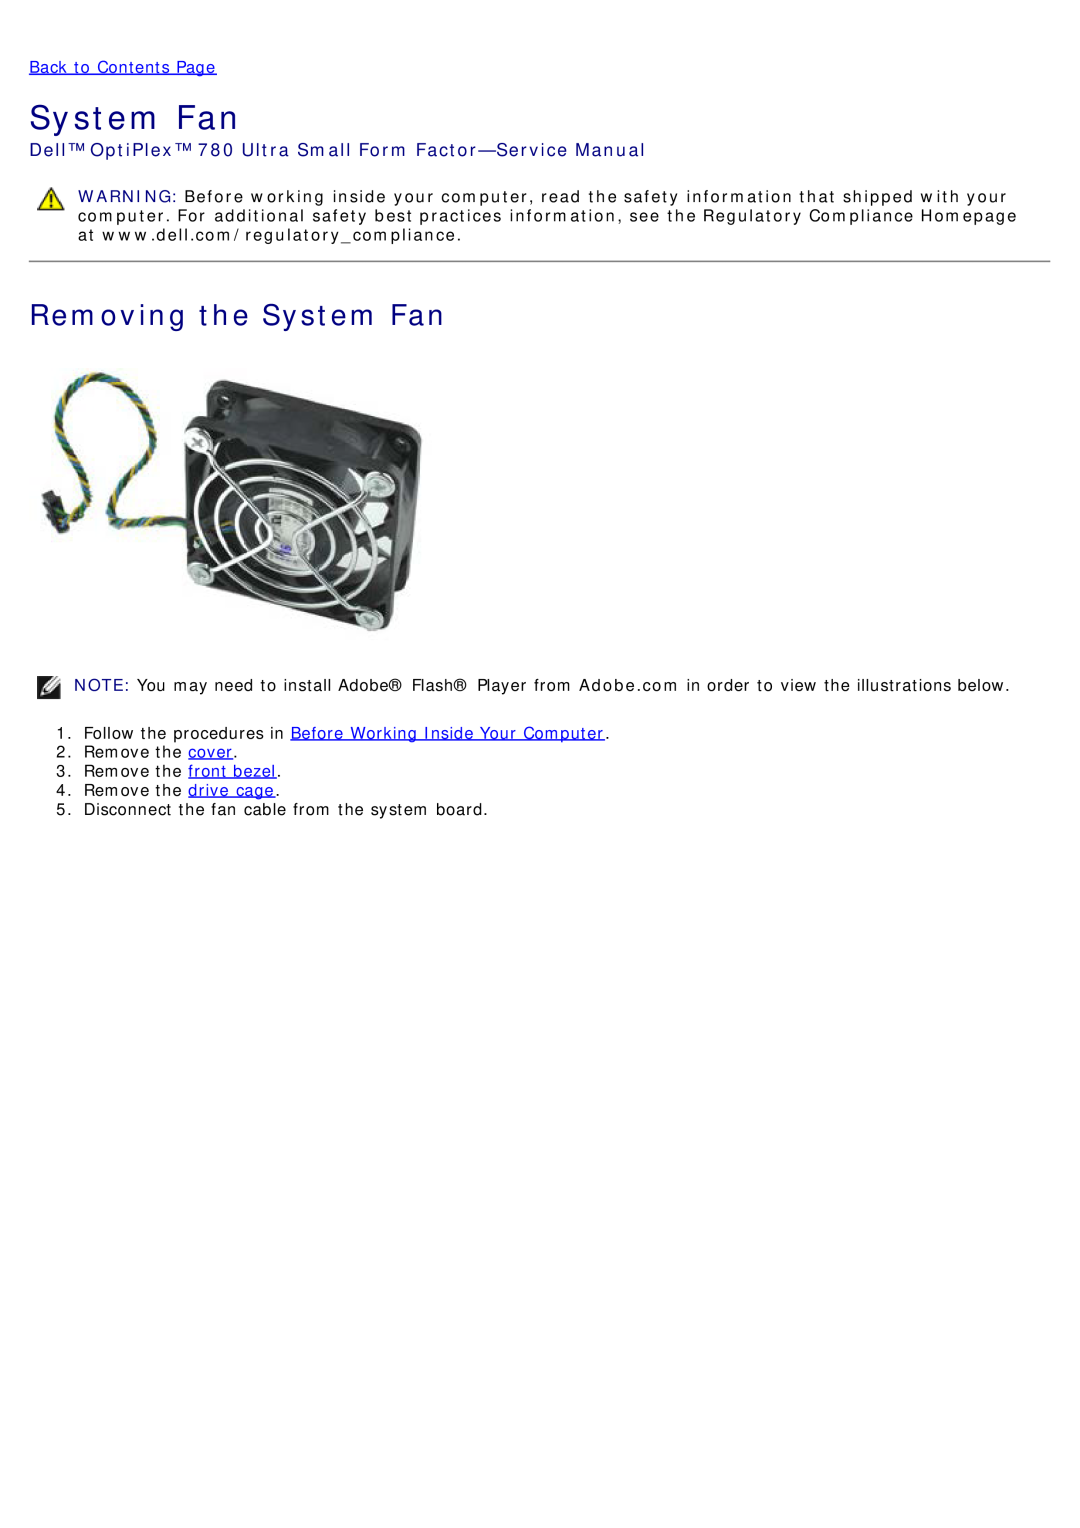 Dell Removing the System Fan, Dell OptiPlex 780 Ultra Small Form Factor-Service Manual, Back to Contents Page 